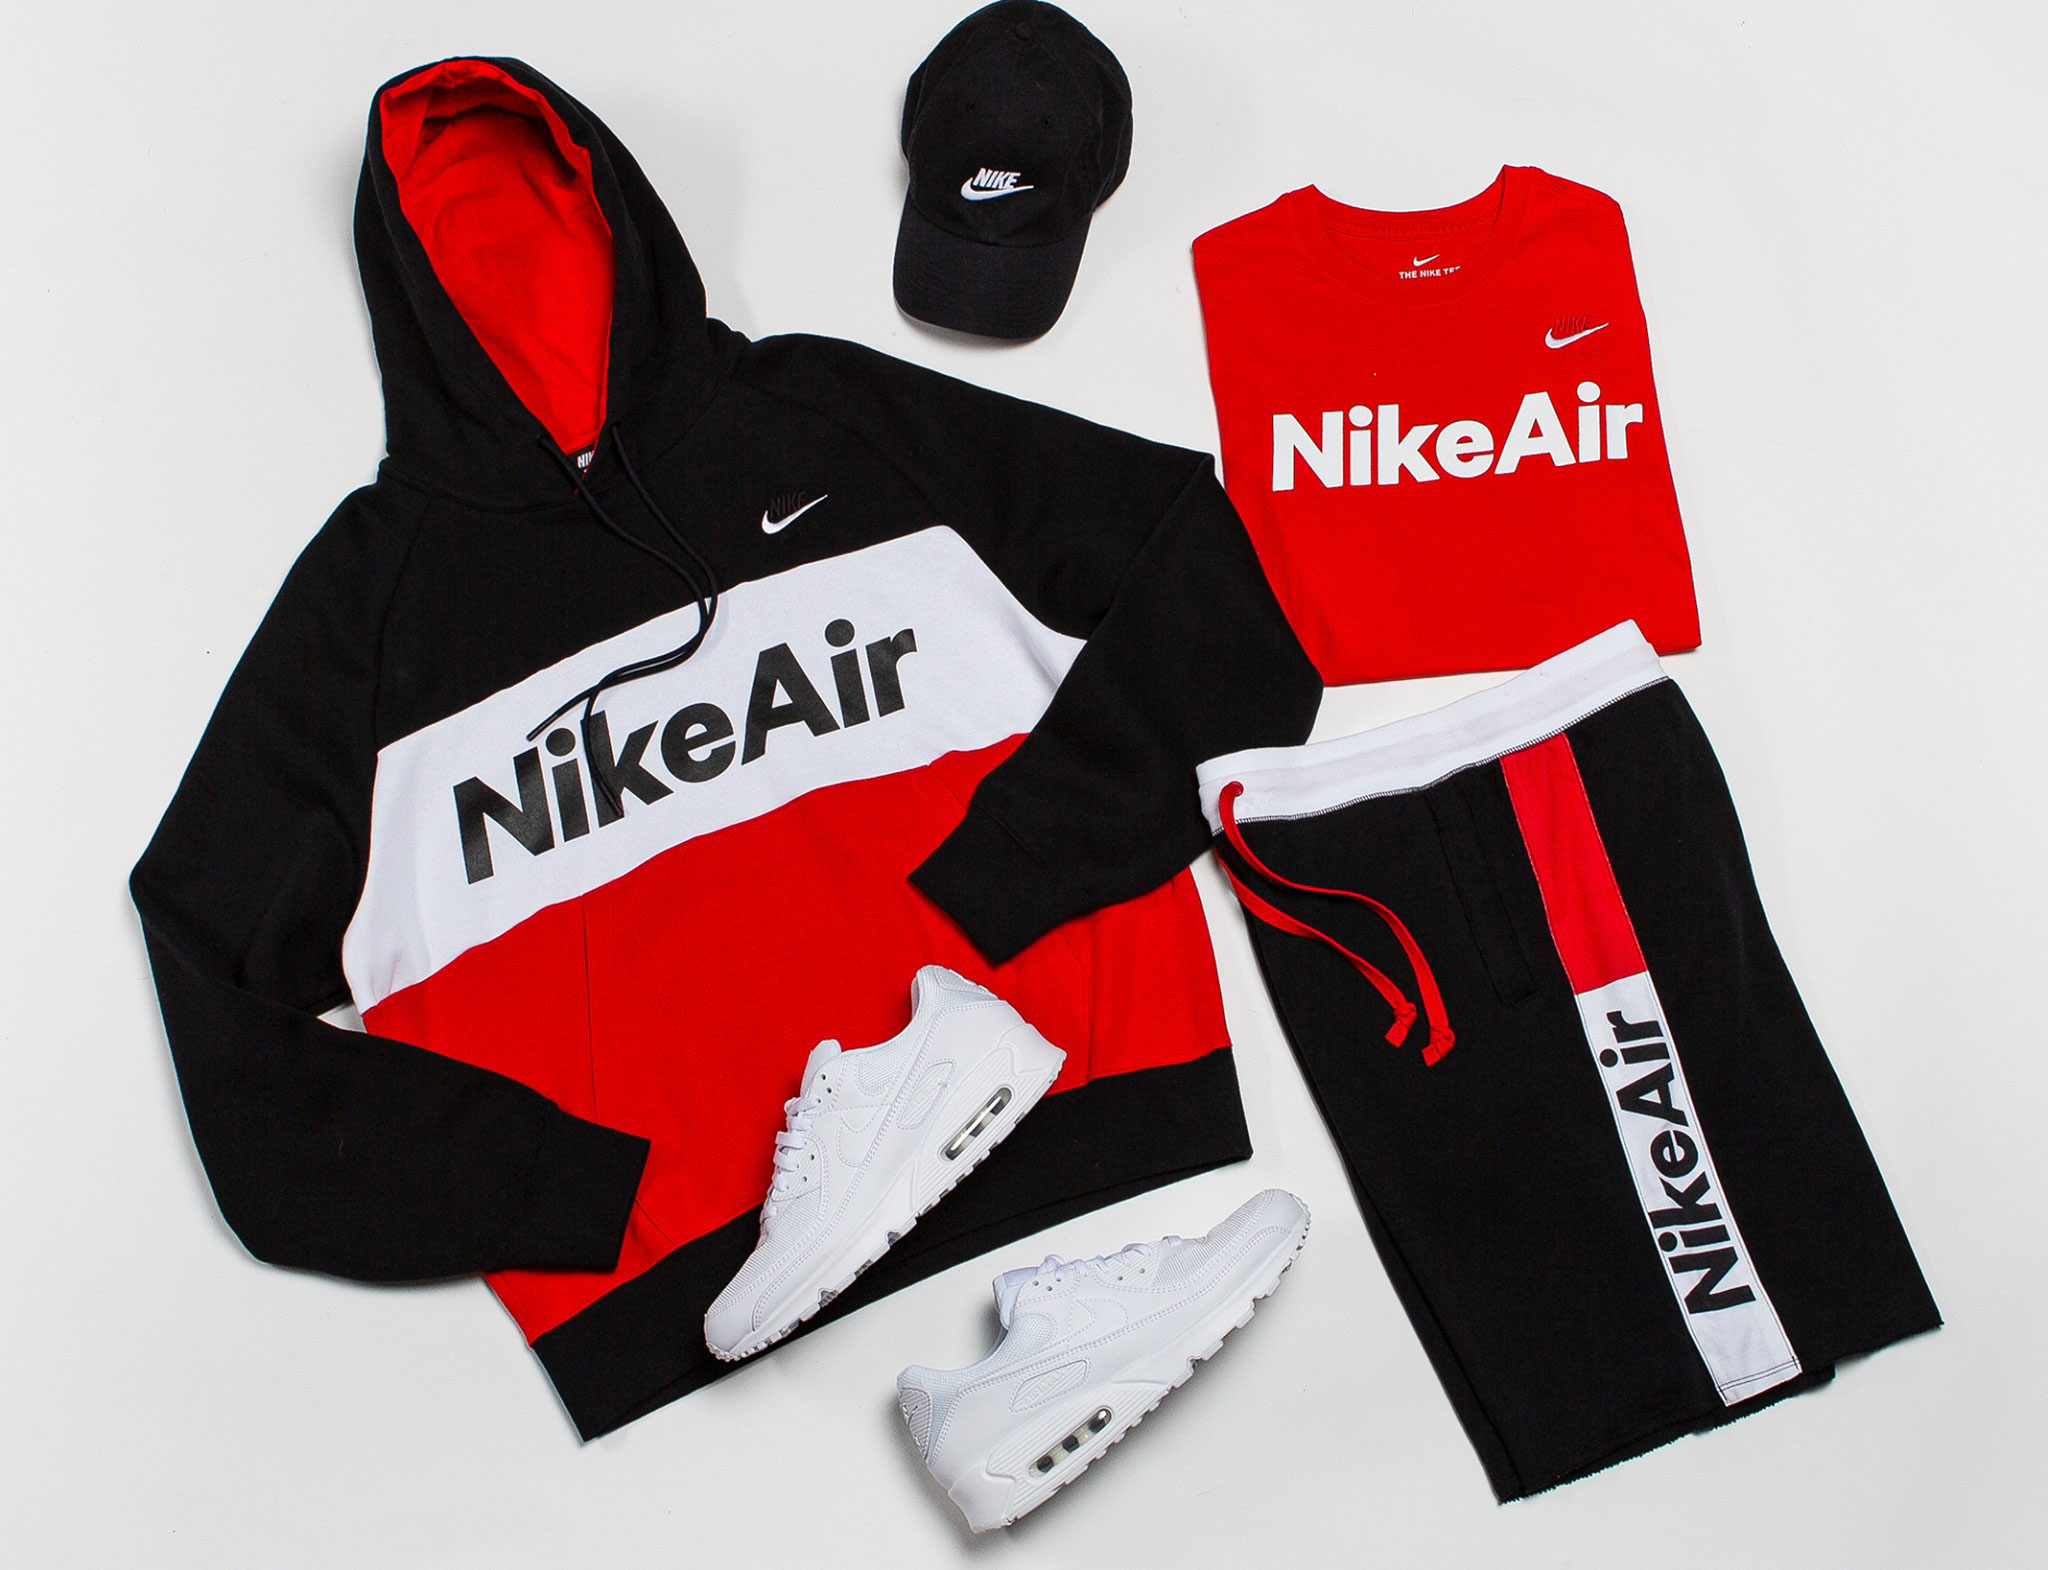 red and black nike jogging suit